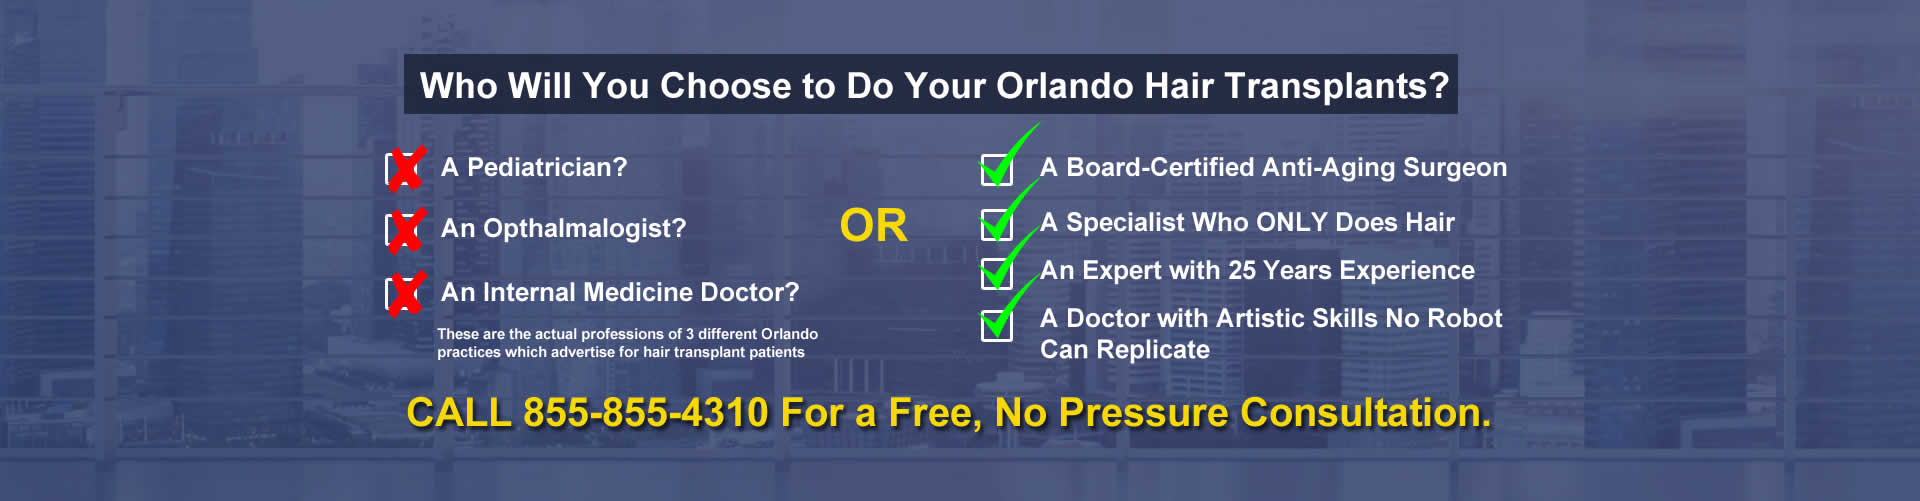 How to Choose the Best Hair Transplant Surgeon in Orlando